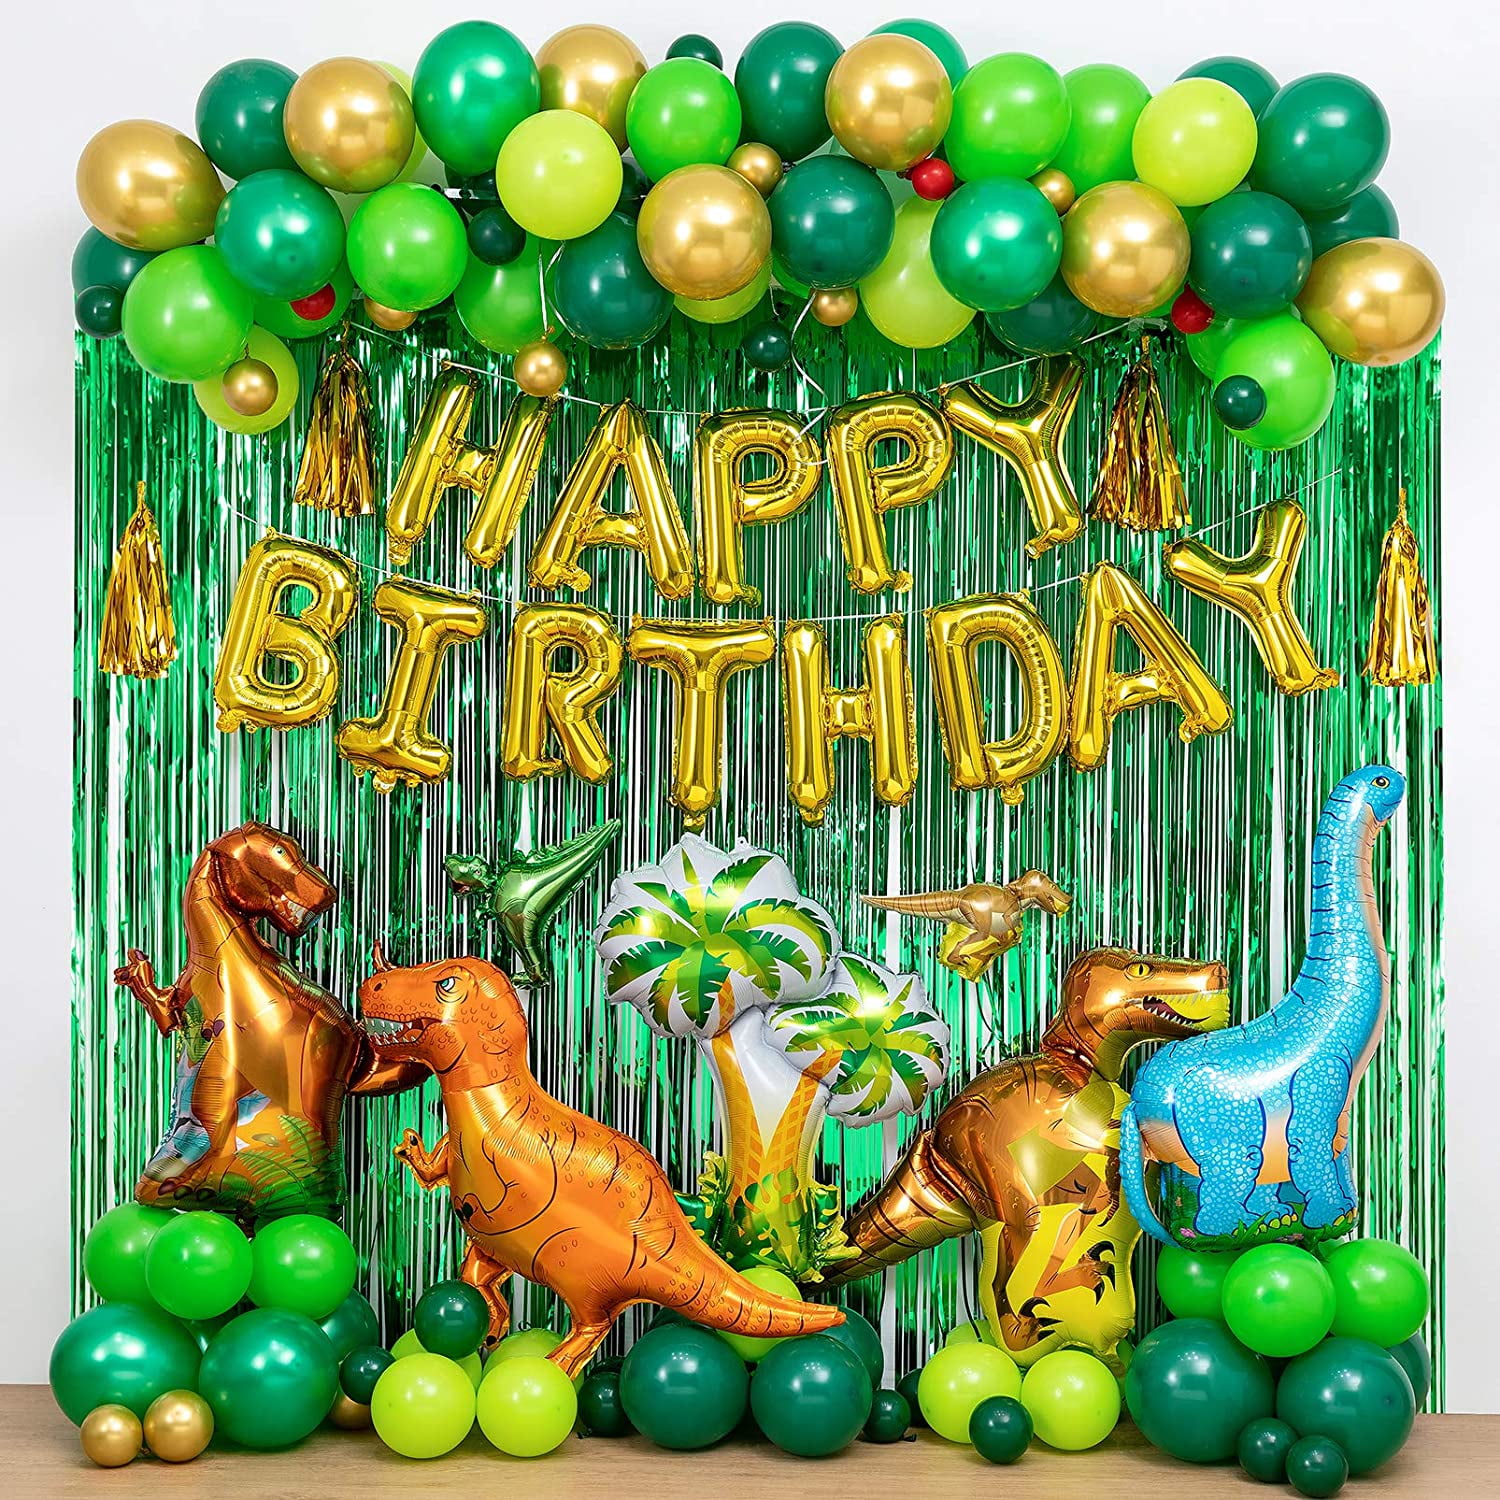 Dinosaur Birthday Decorations and Kids Party Favors for 12 Children Tattoos Figures E=mc² Birthday Supplies Learning Toys 4 You Stampers Dinosaur Party Supplies for Boys Girls 316 Piece Stickers Masks Mr Toys